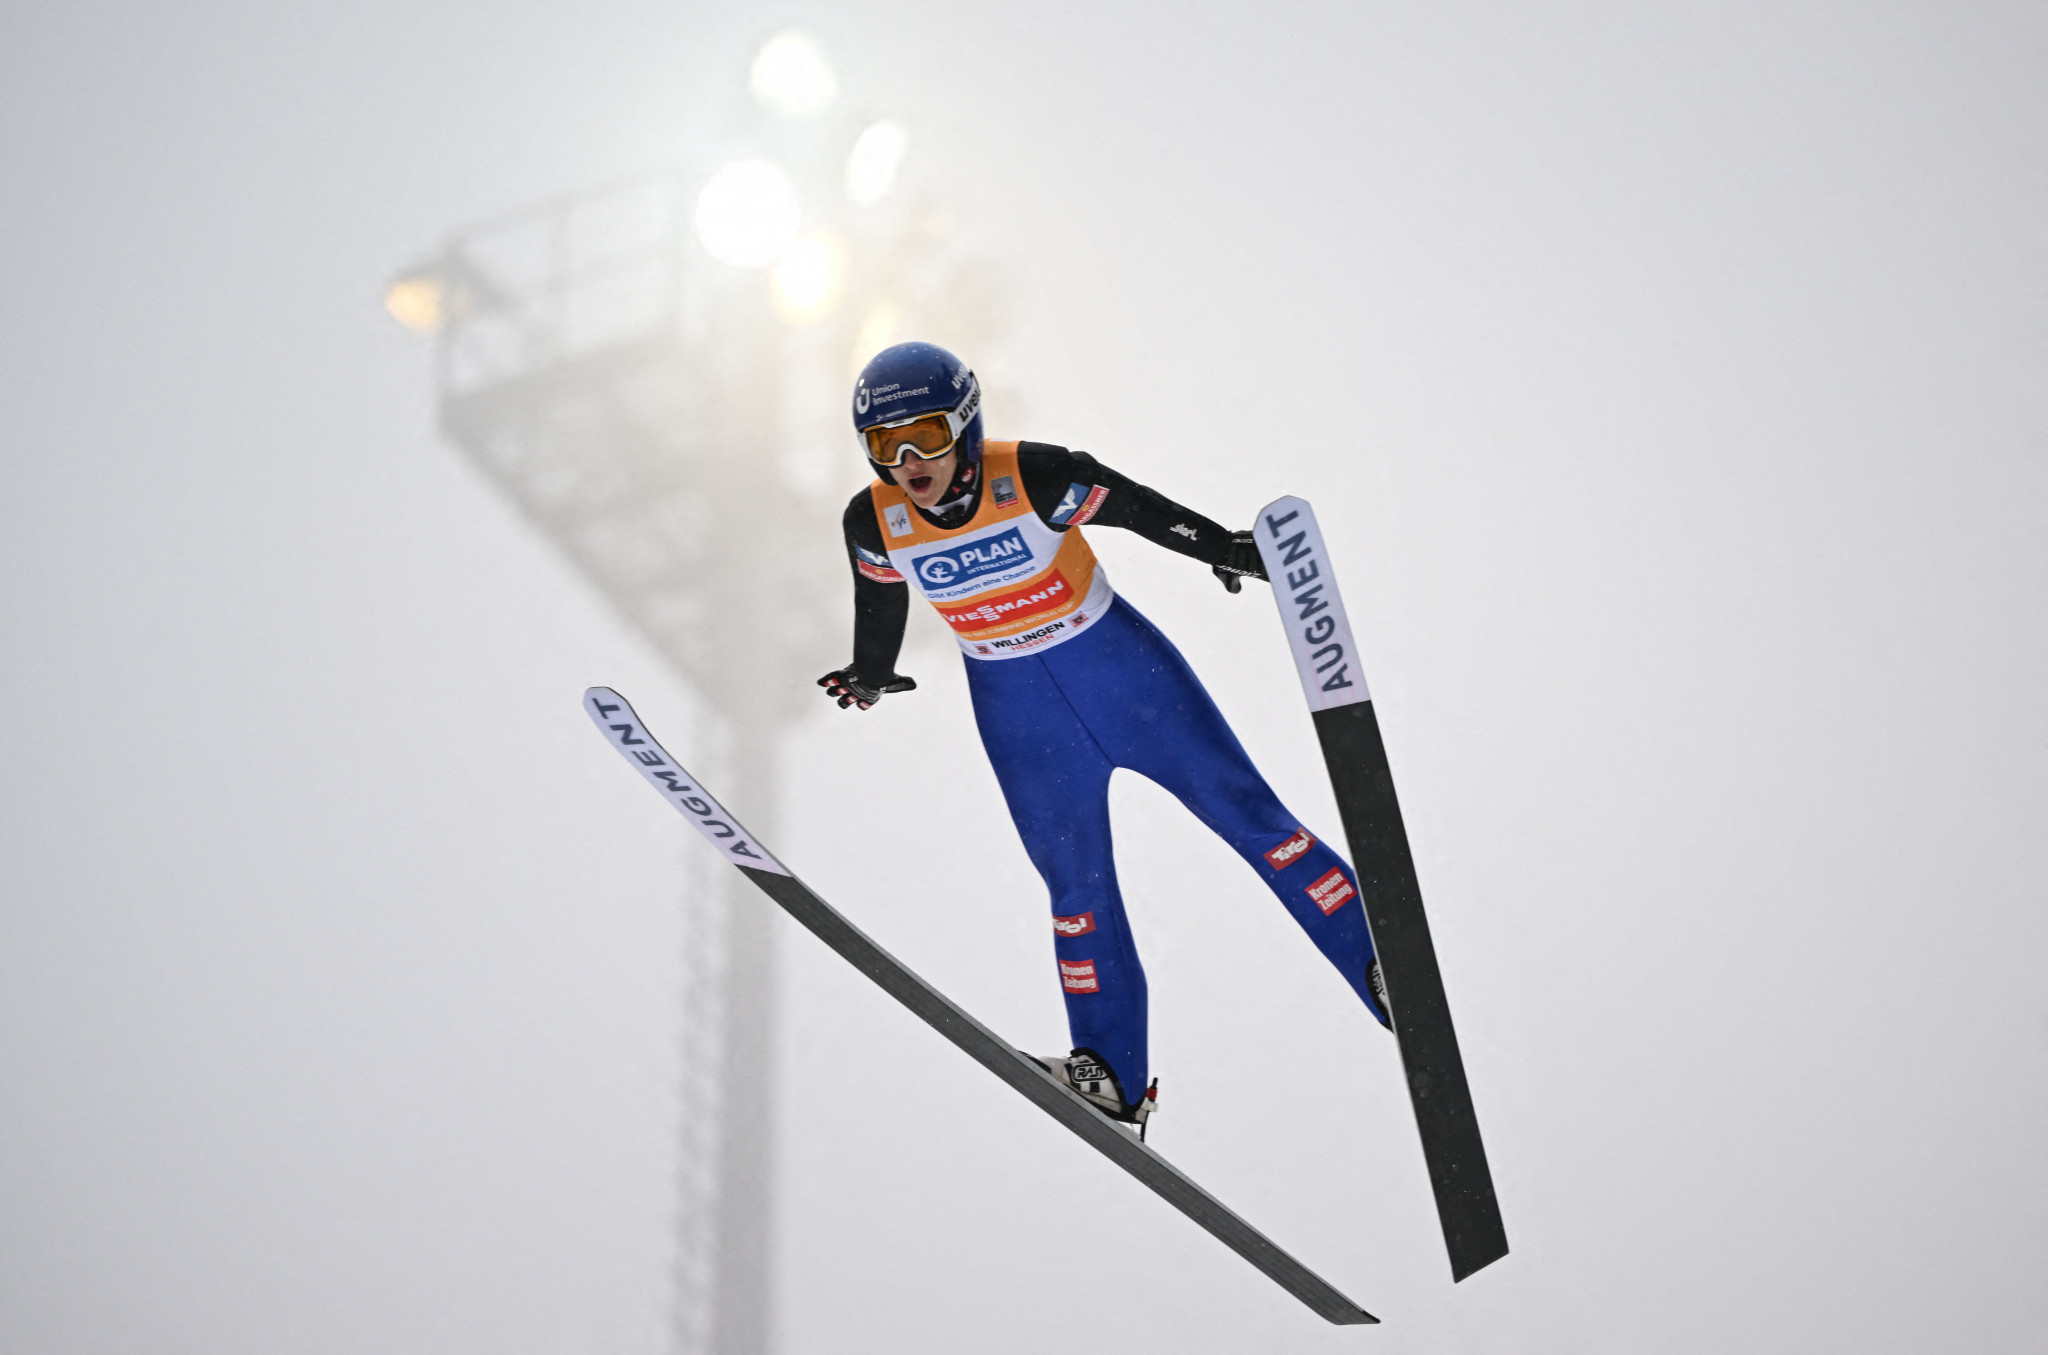 Pinkelnig extends overall lead in Ski Jumping World Cup with Hinzenbach gold